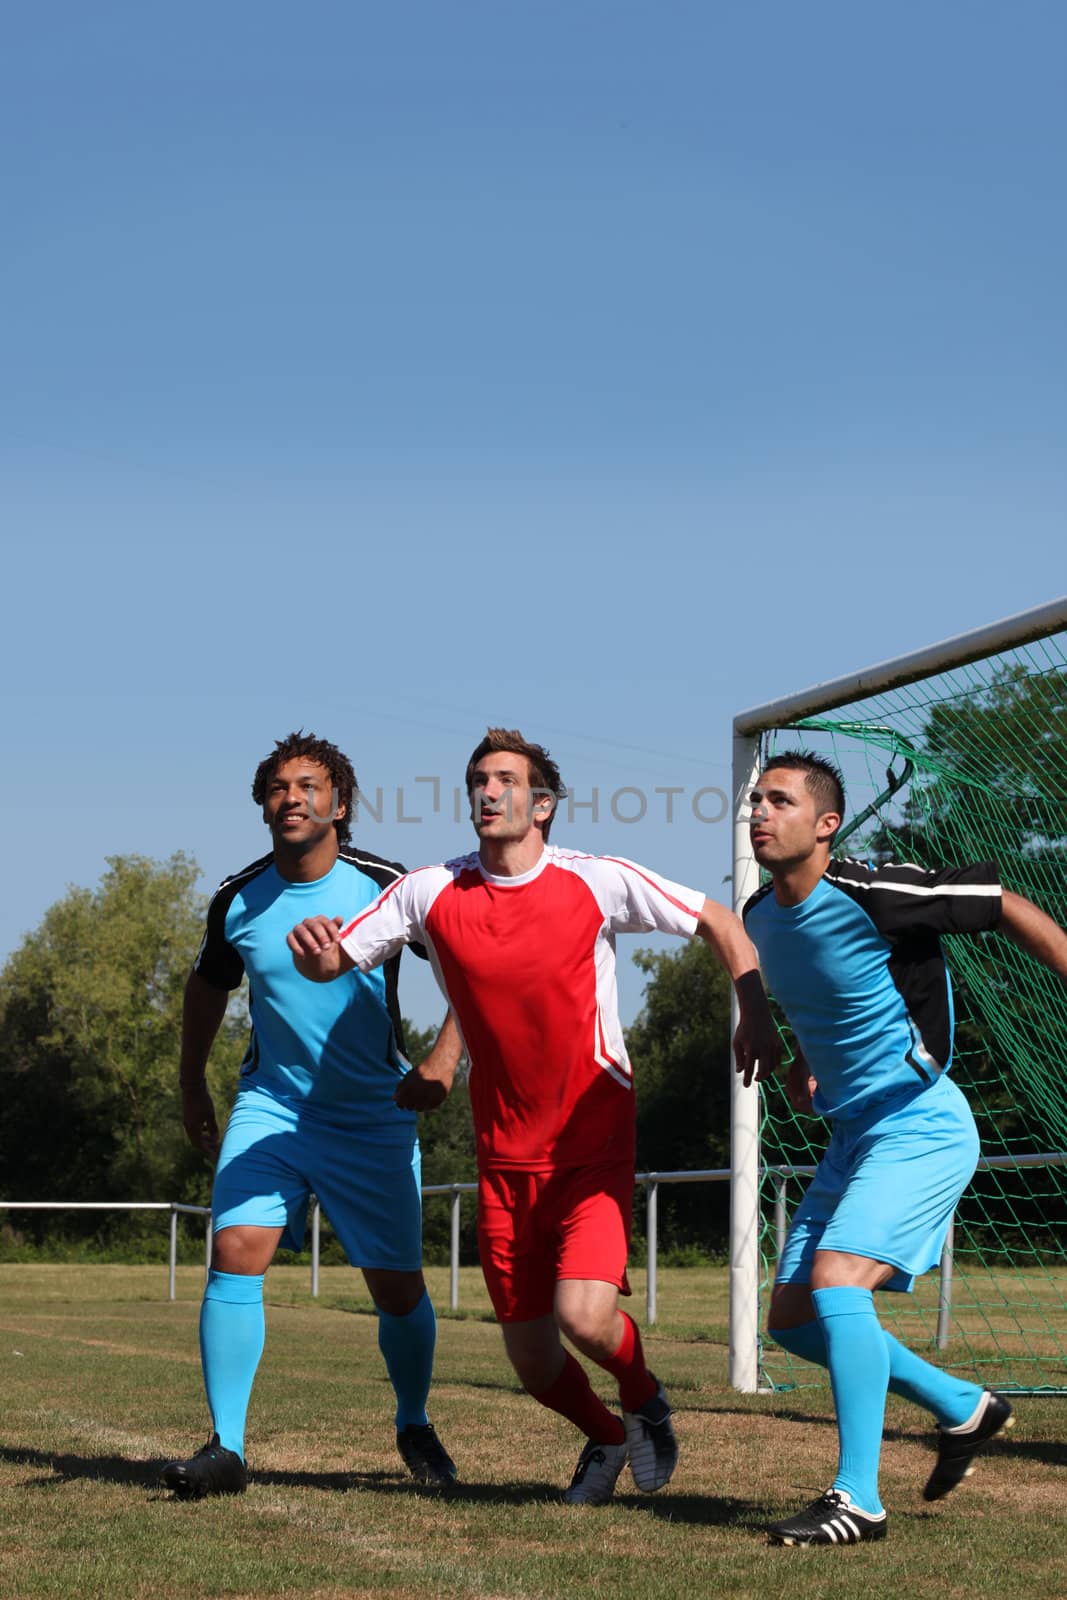 Three footballers waiting for the ball in front of goal